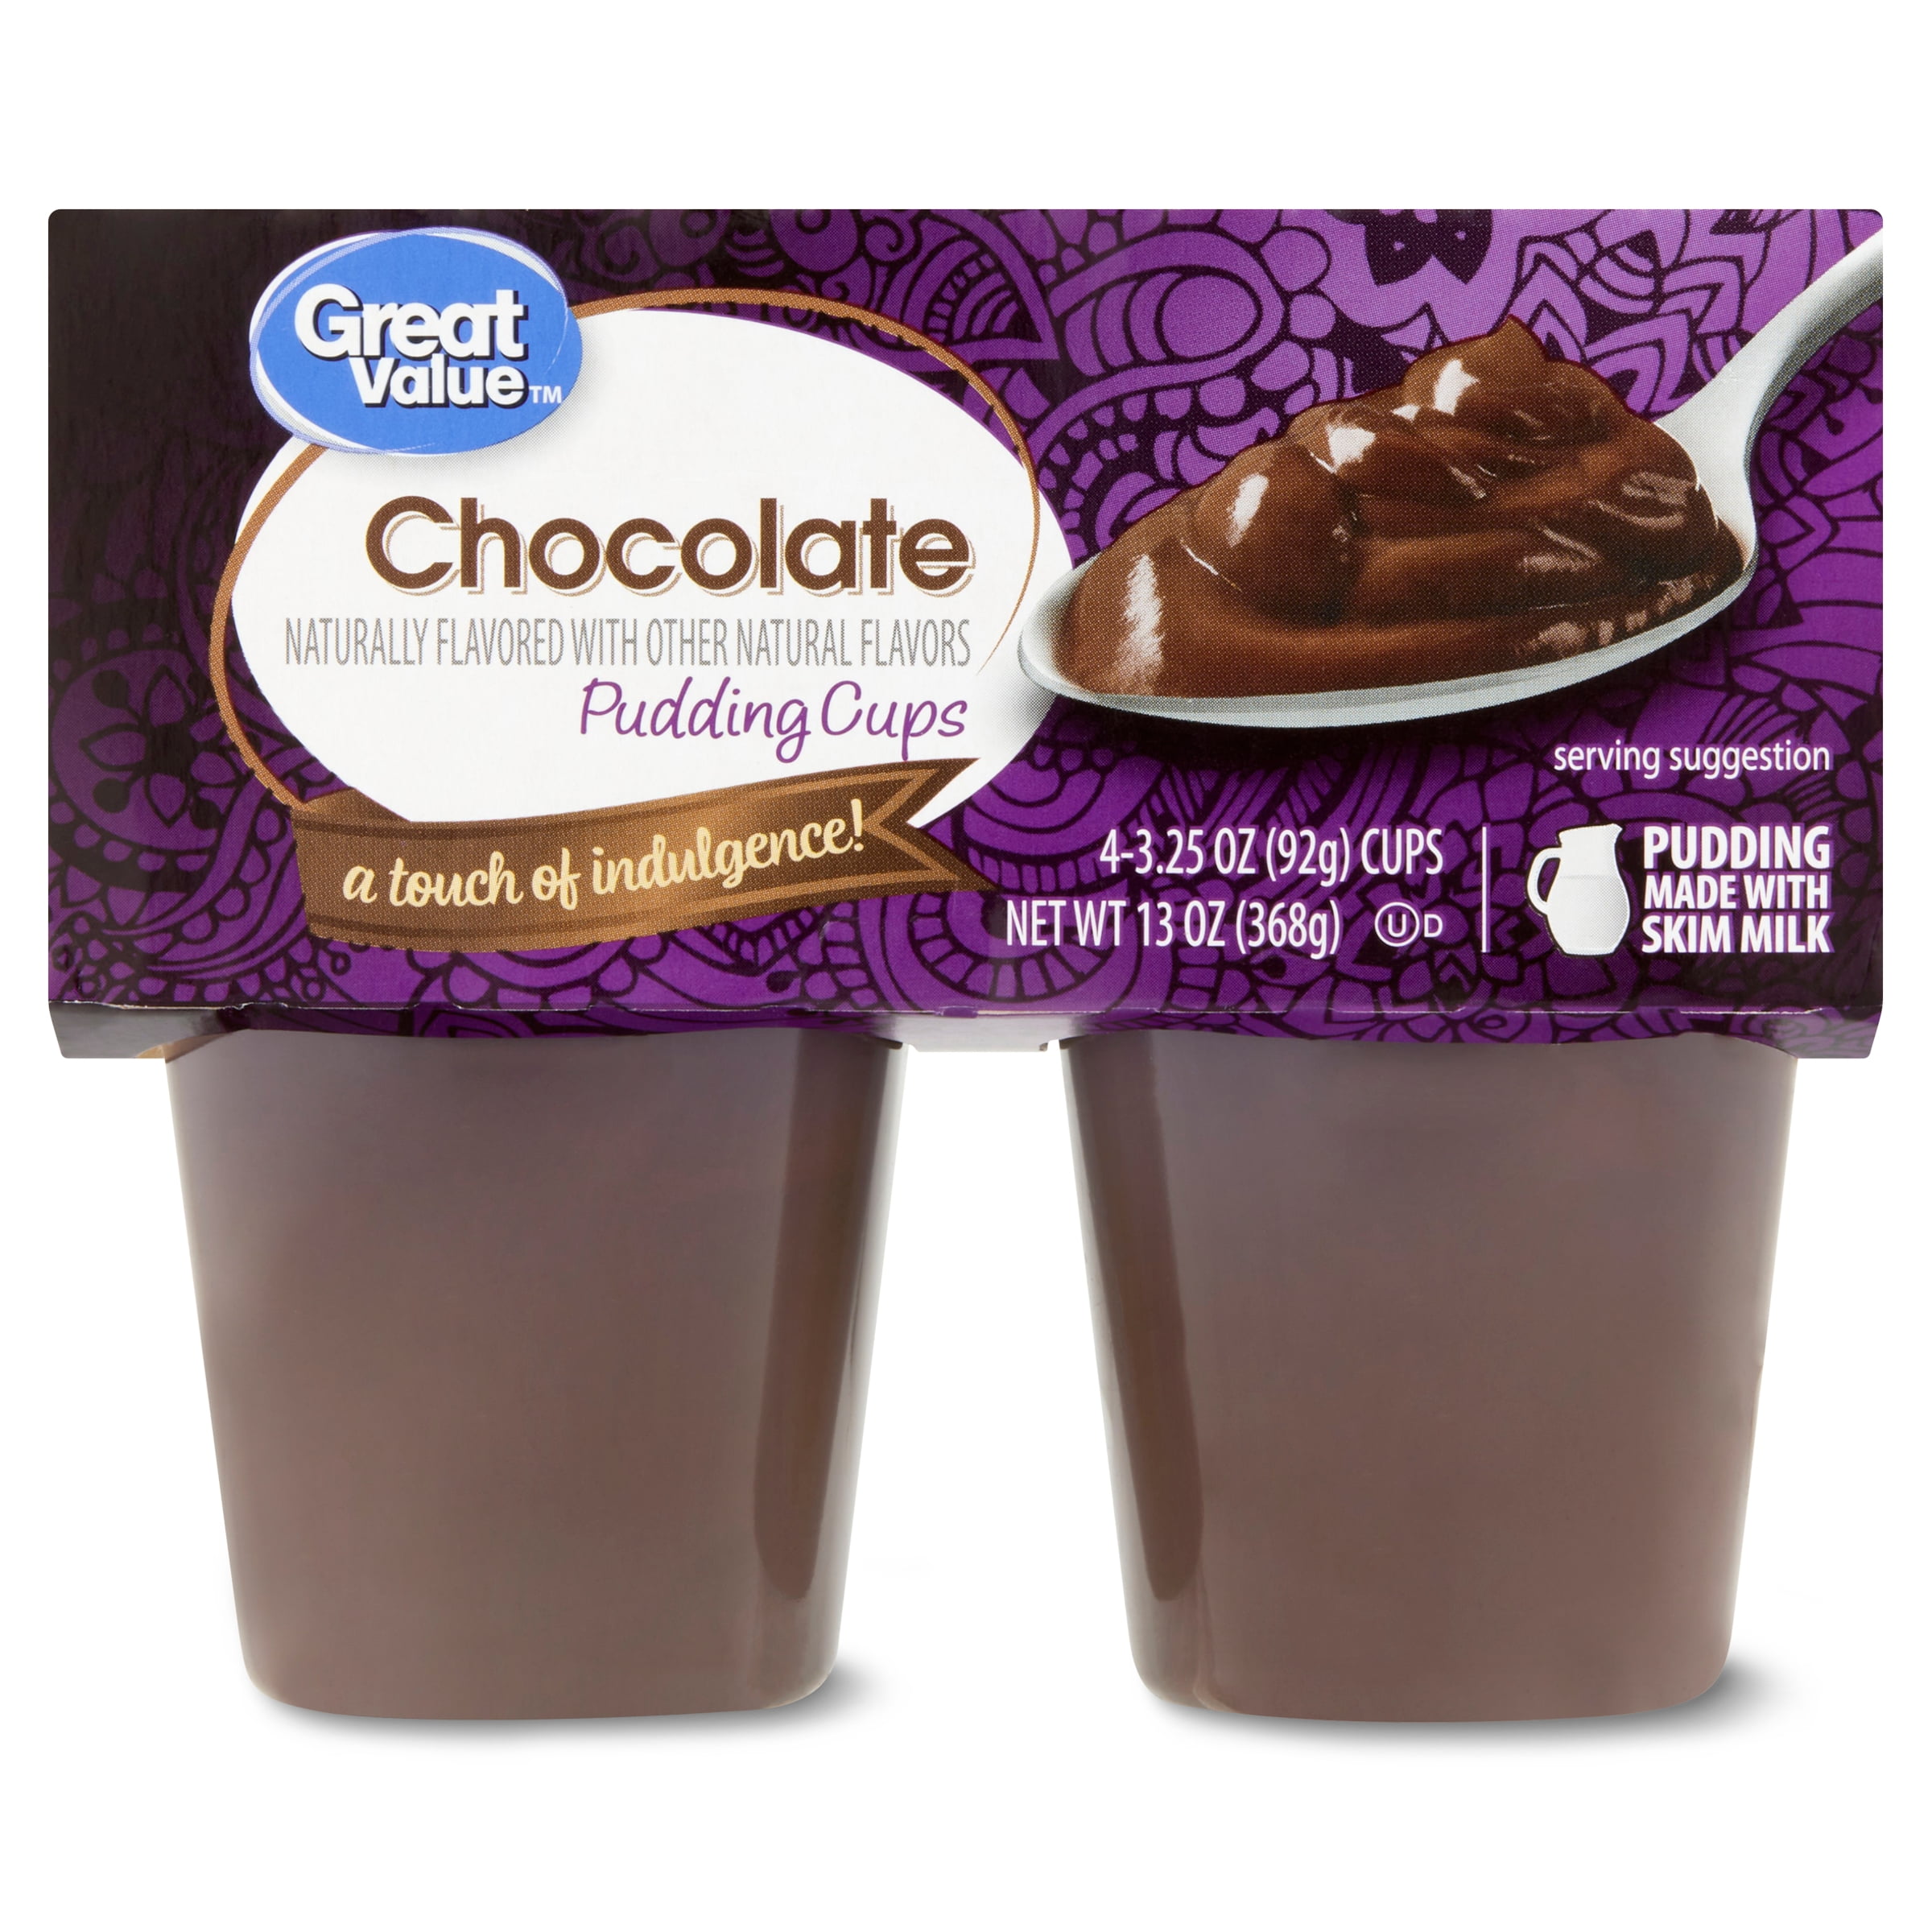 Great Value Chocolate Pudding Cups, 3.25 Oz, 4 Count